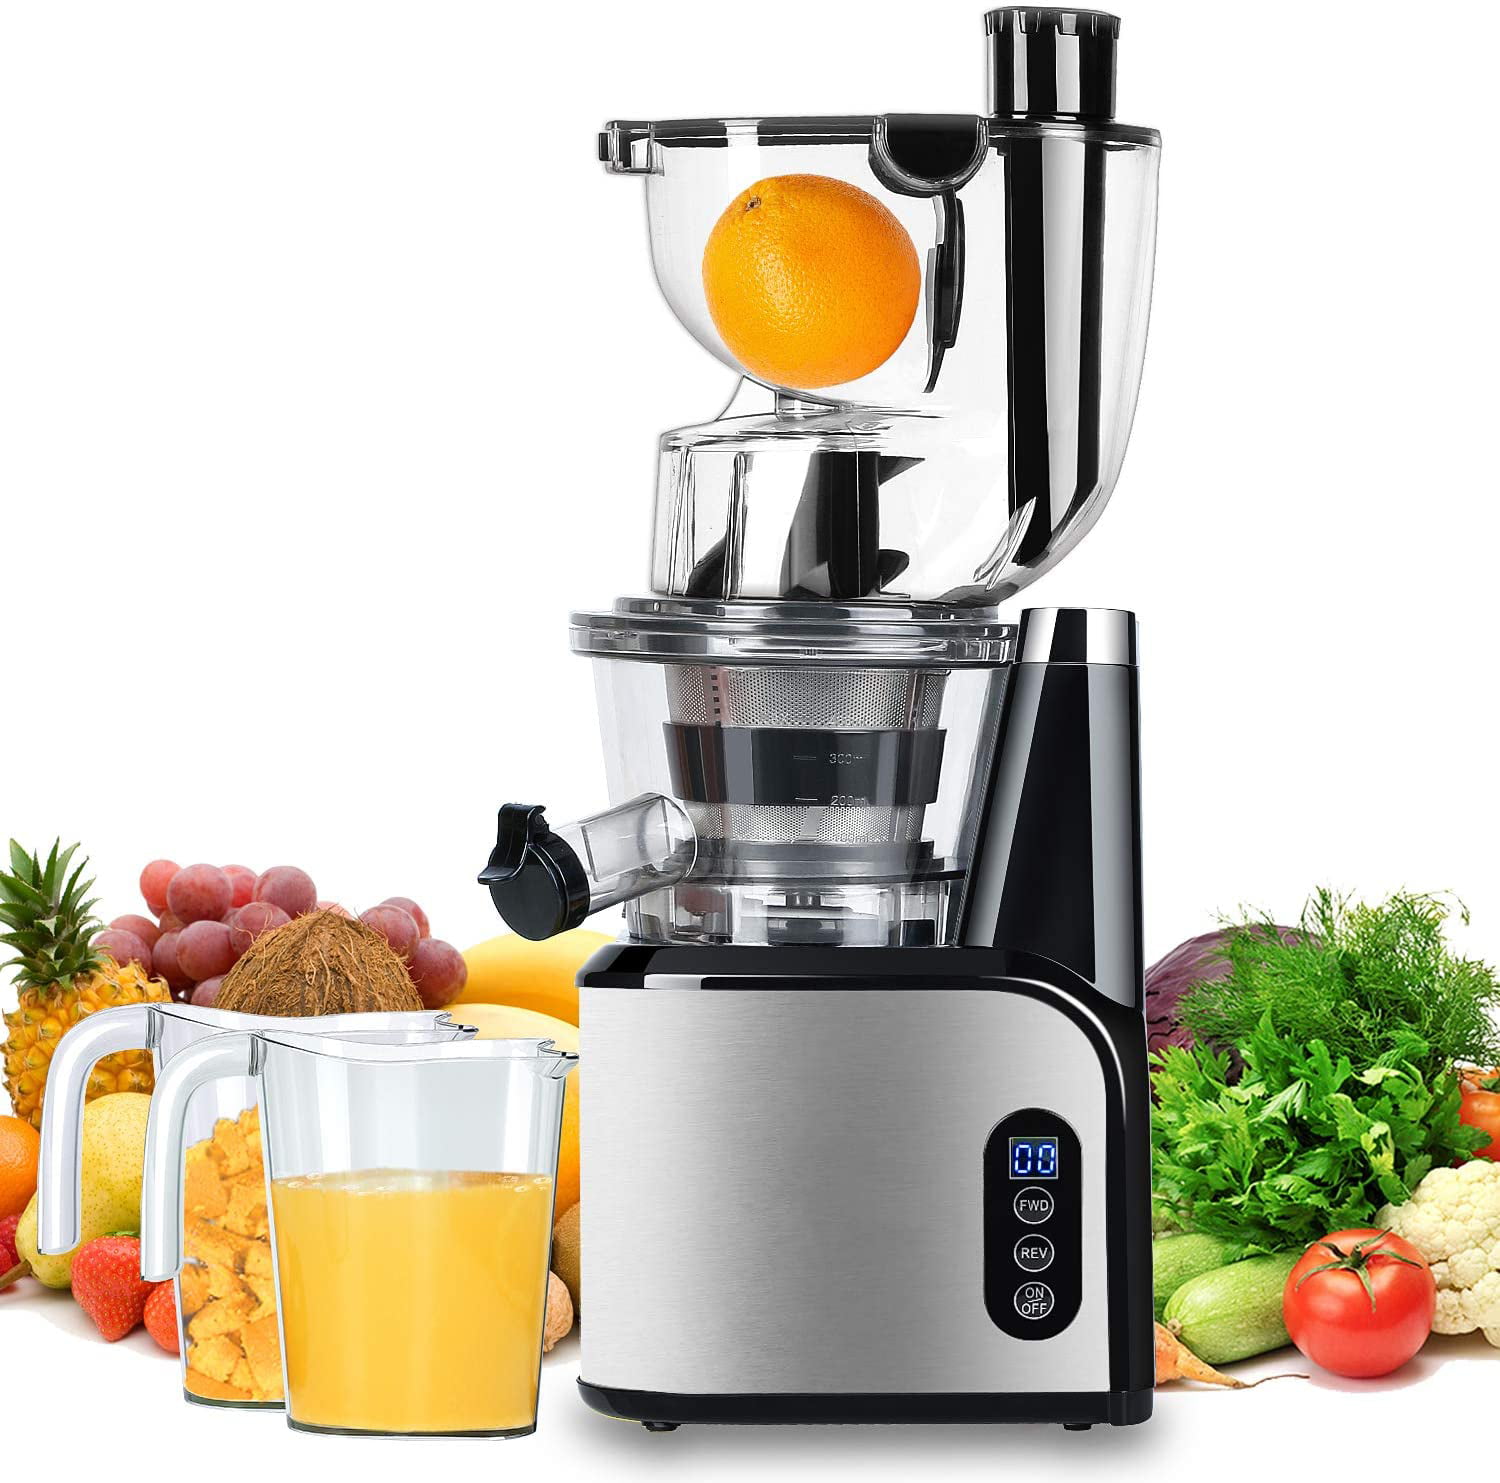 ROVKA High Nutrient and Vitamins Juice Extractor Gold Slow Masticating Juicer 3.15 Inches Wide Chute Cold Press Juicer for Fruit 